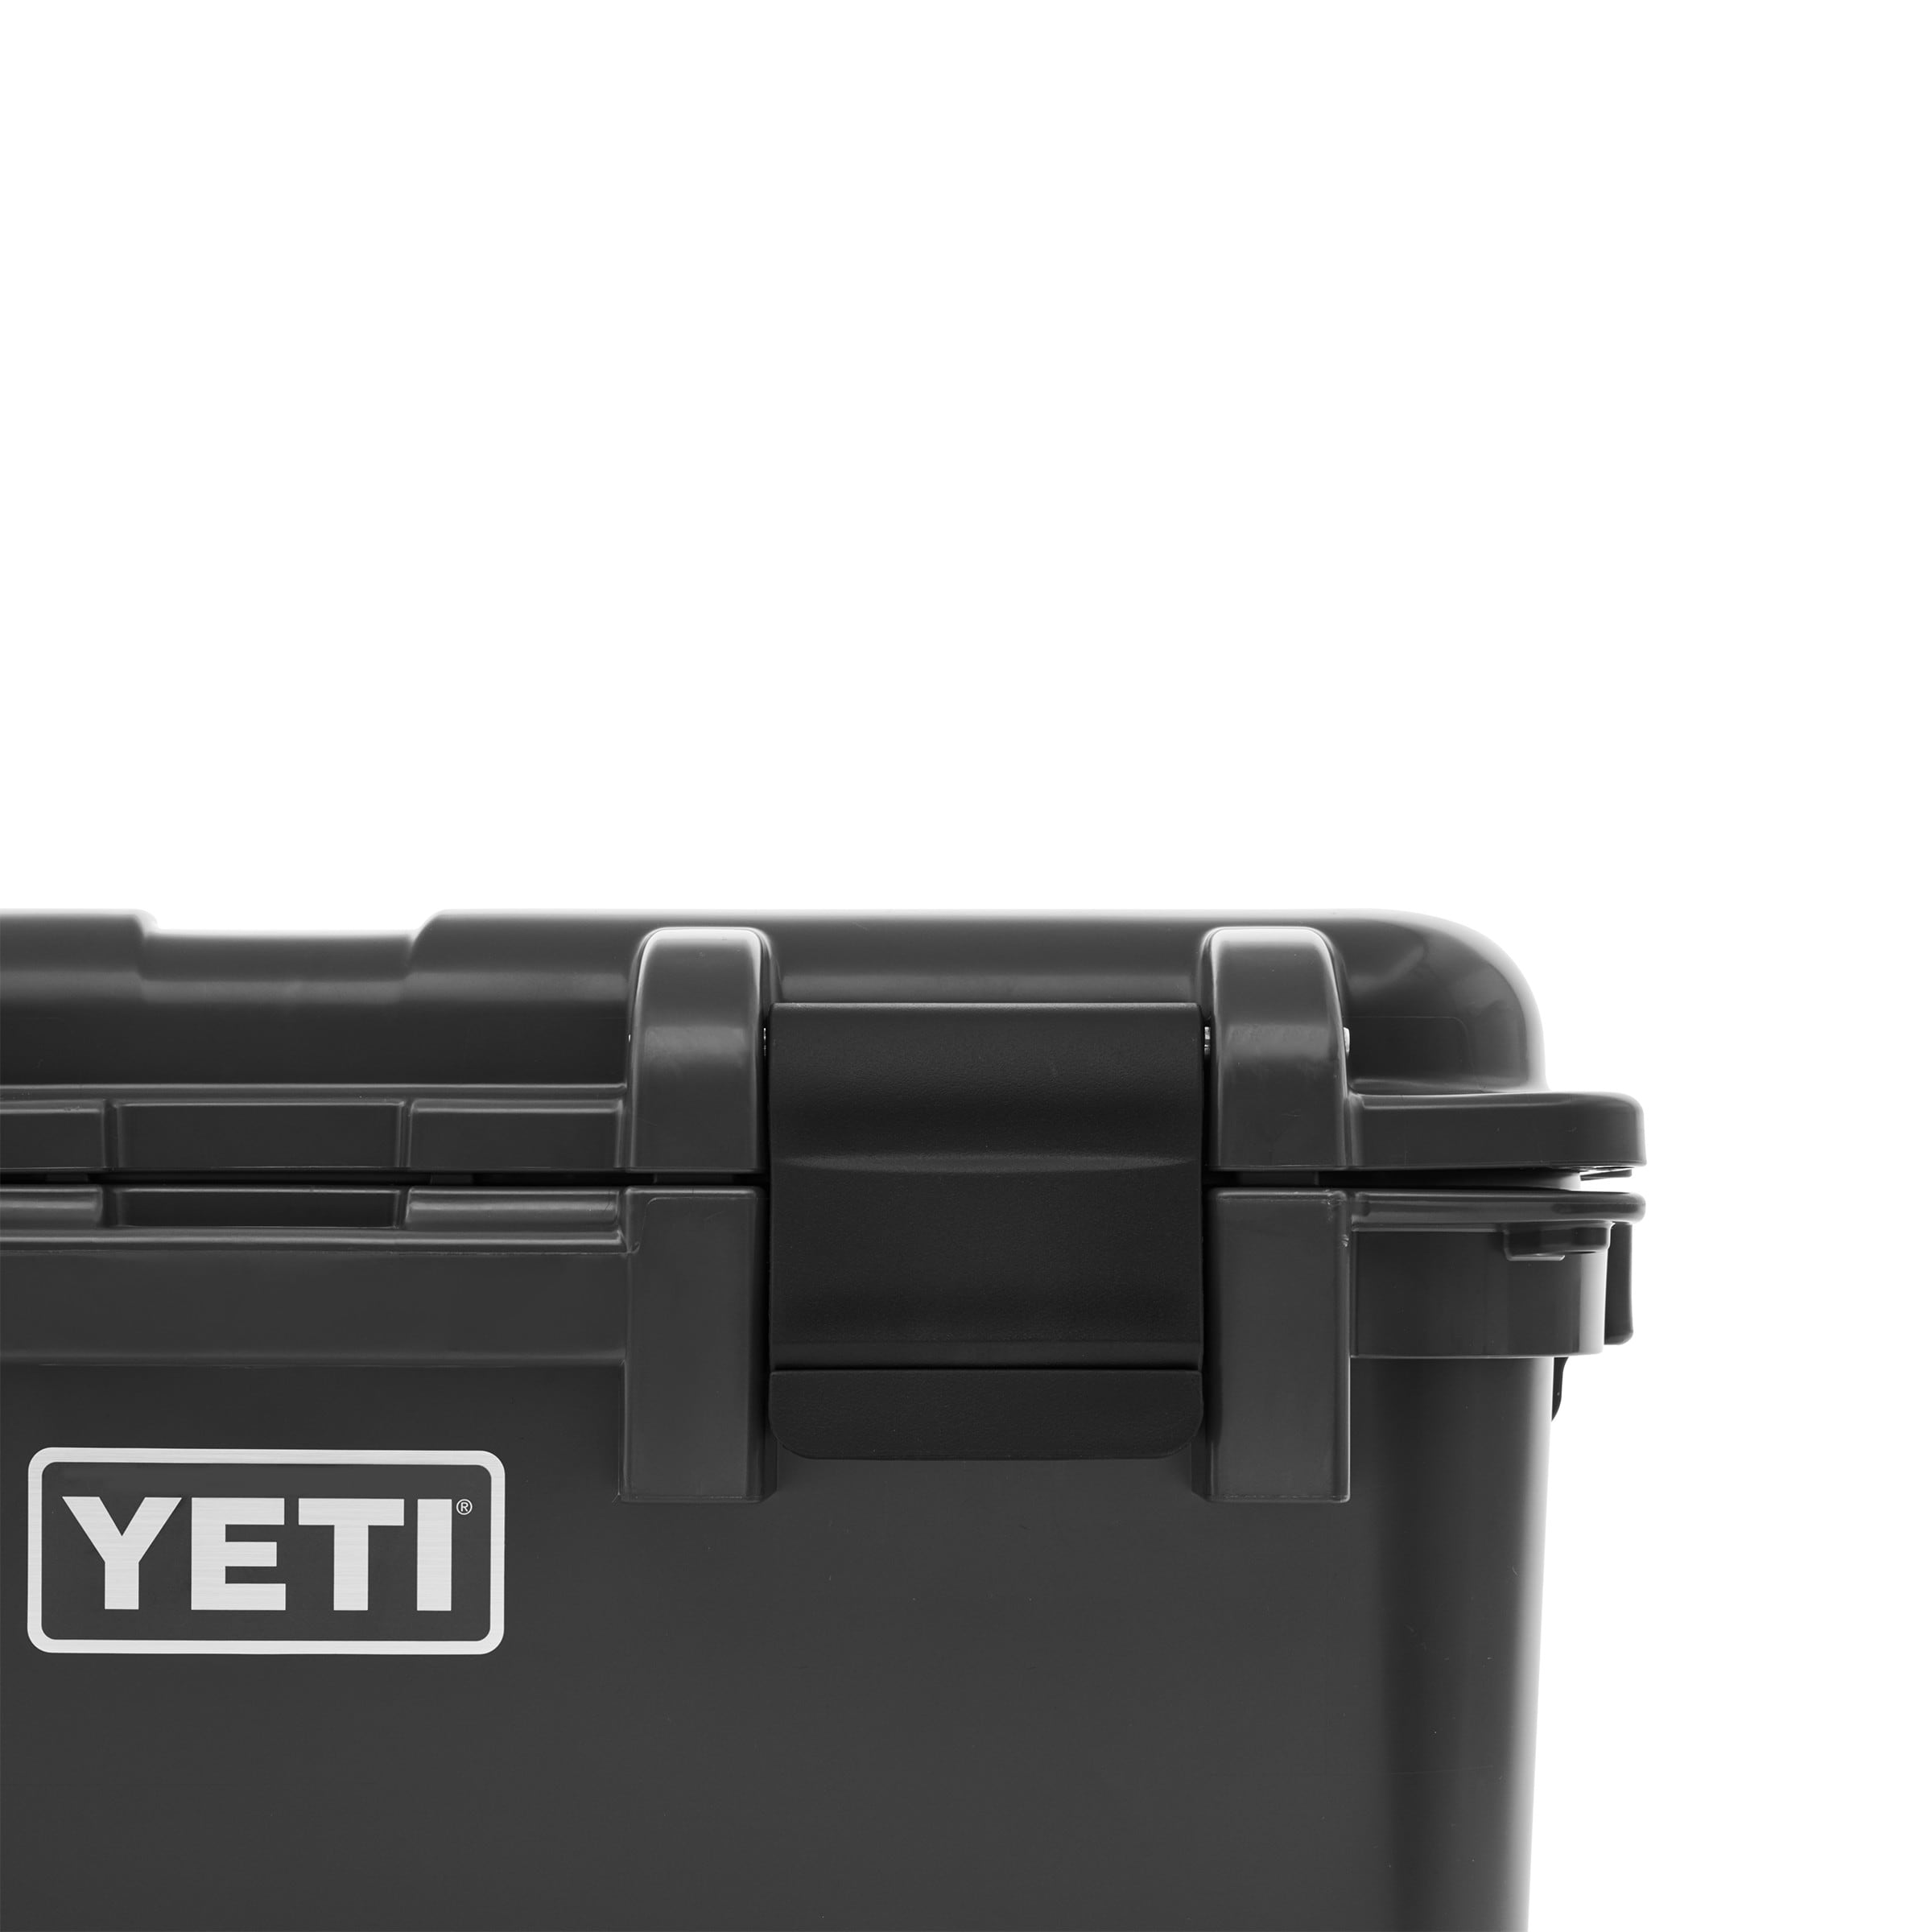 Best Black Friday Yeti deals: Save 25% off the LoadOut GoBox 30